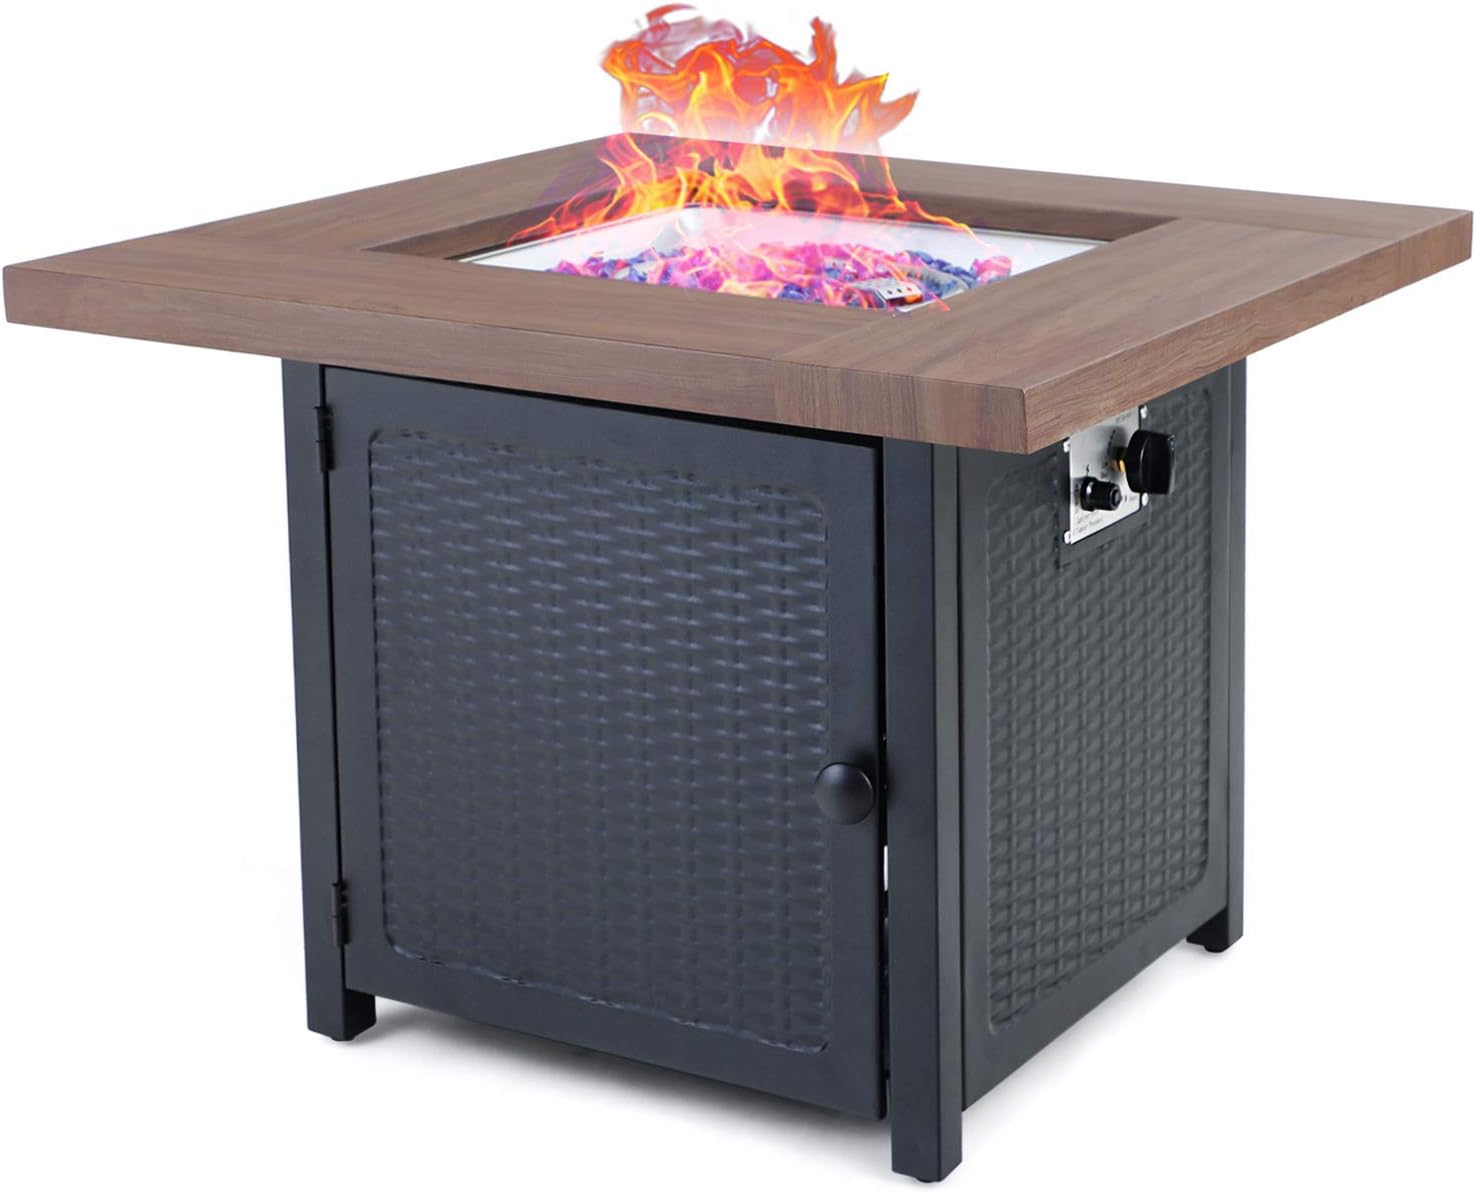 MFSTUDIO 34 inch 50000-BTU Brown Tabletop Gas Fire Pit Table, Steel Propane Square Fire Table with Lid and Blue Glass for Patio,Backyard and Balcony,Brown